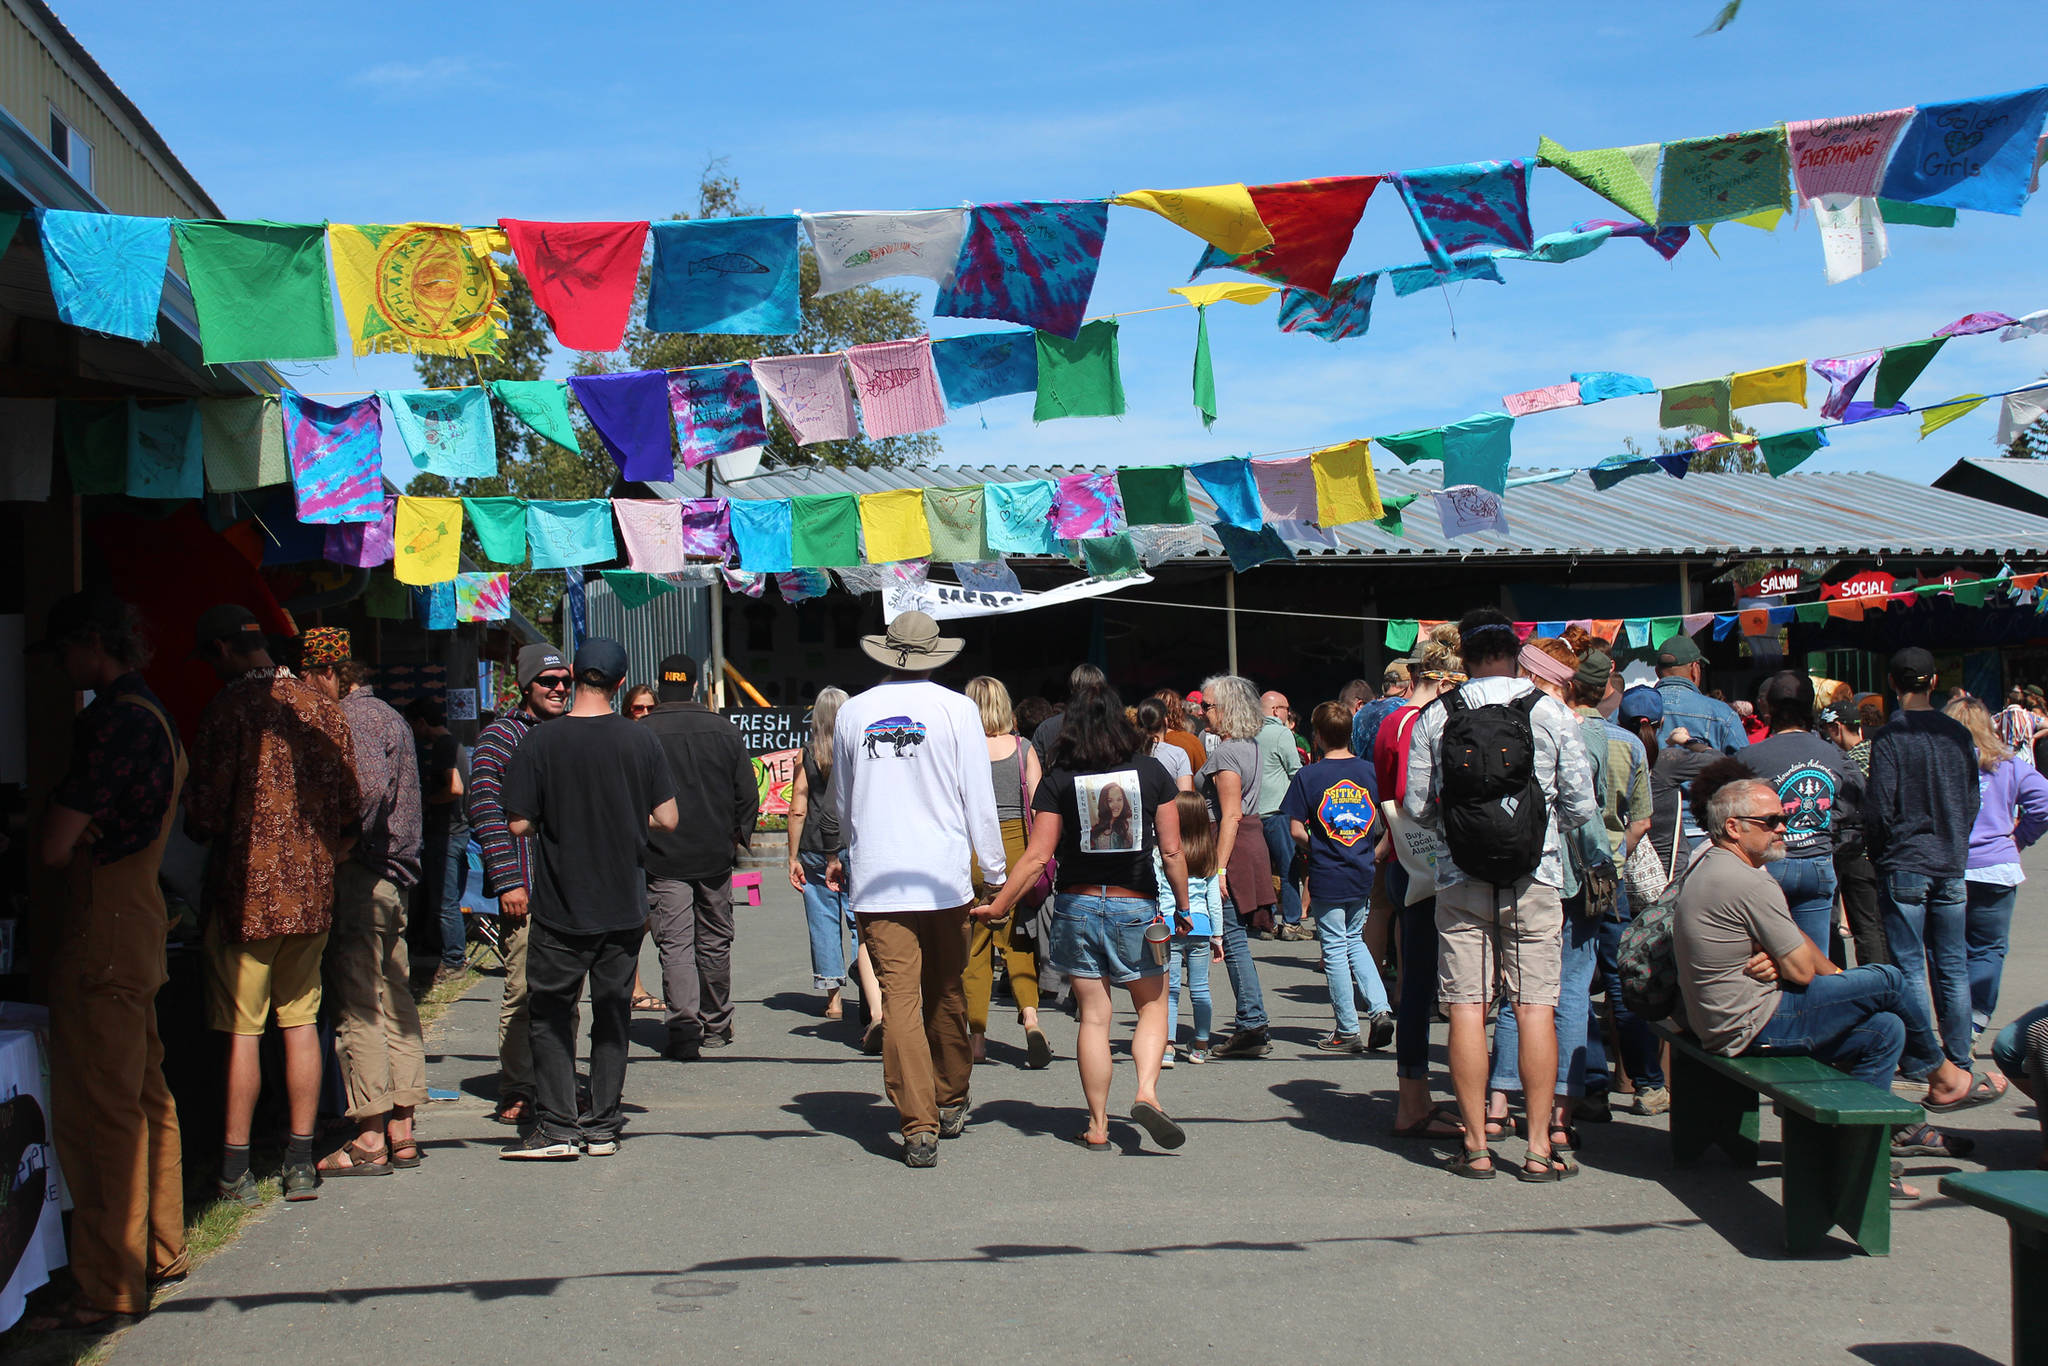 Festival goers walk through the Salmon Causeway — the collection of education and advocacy booths — on Friday, Aug. 2, 2019 at Salmonfest in Ninilchik, Alaska. (Photo by Megan Pacer/Homer News)